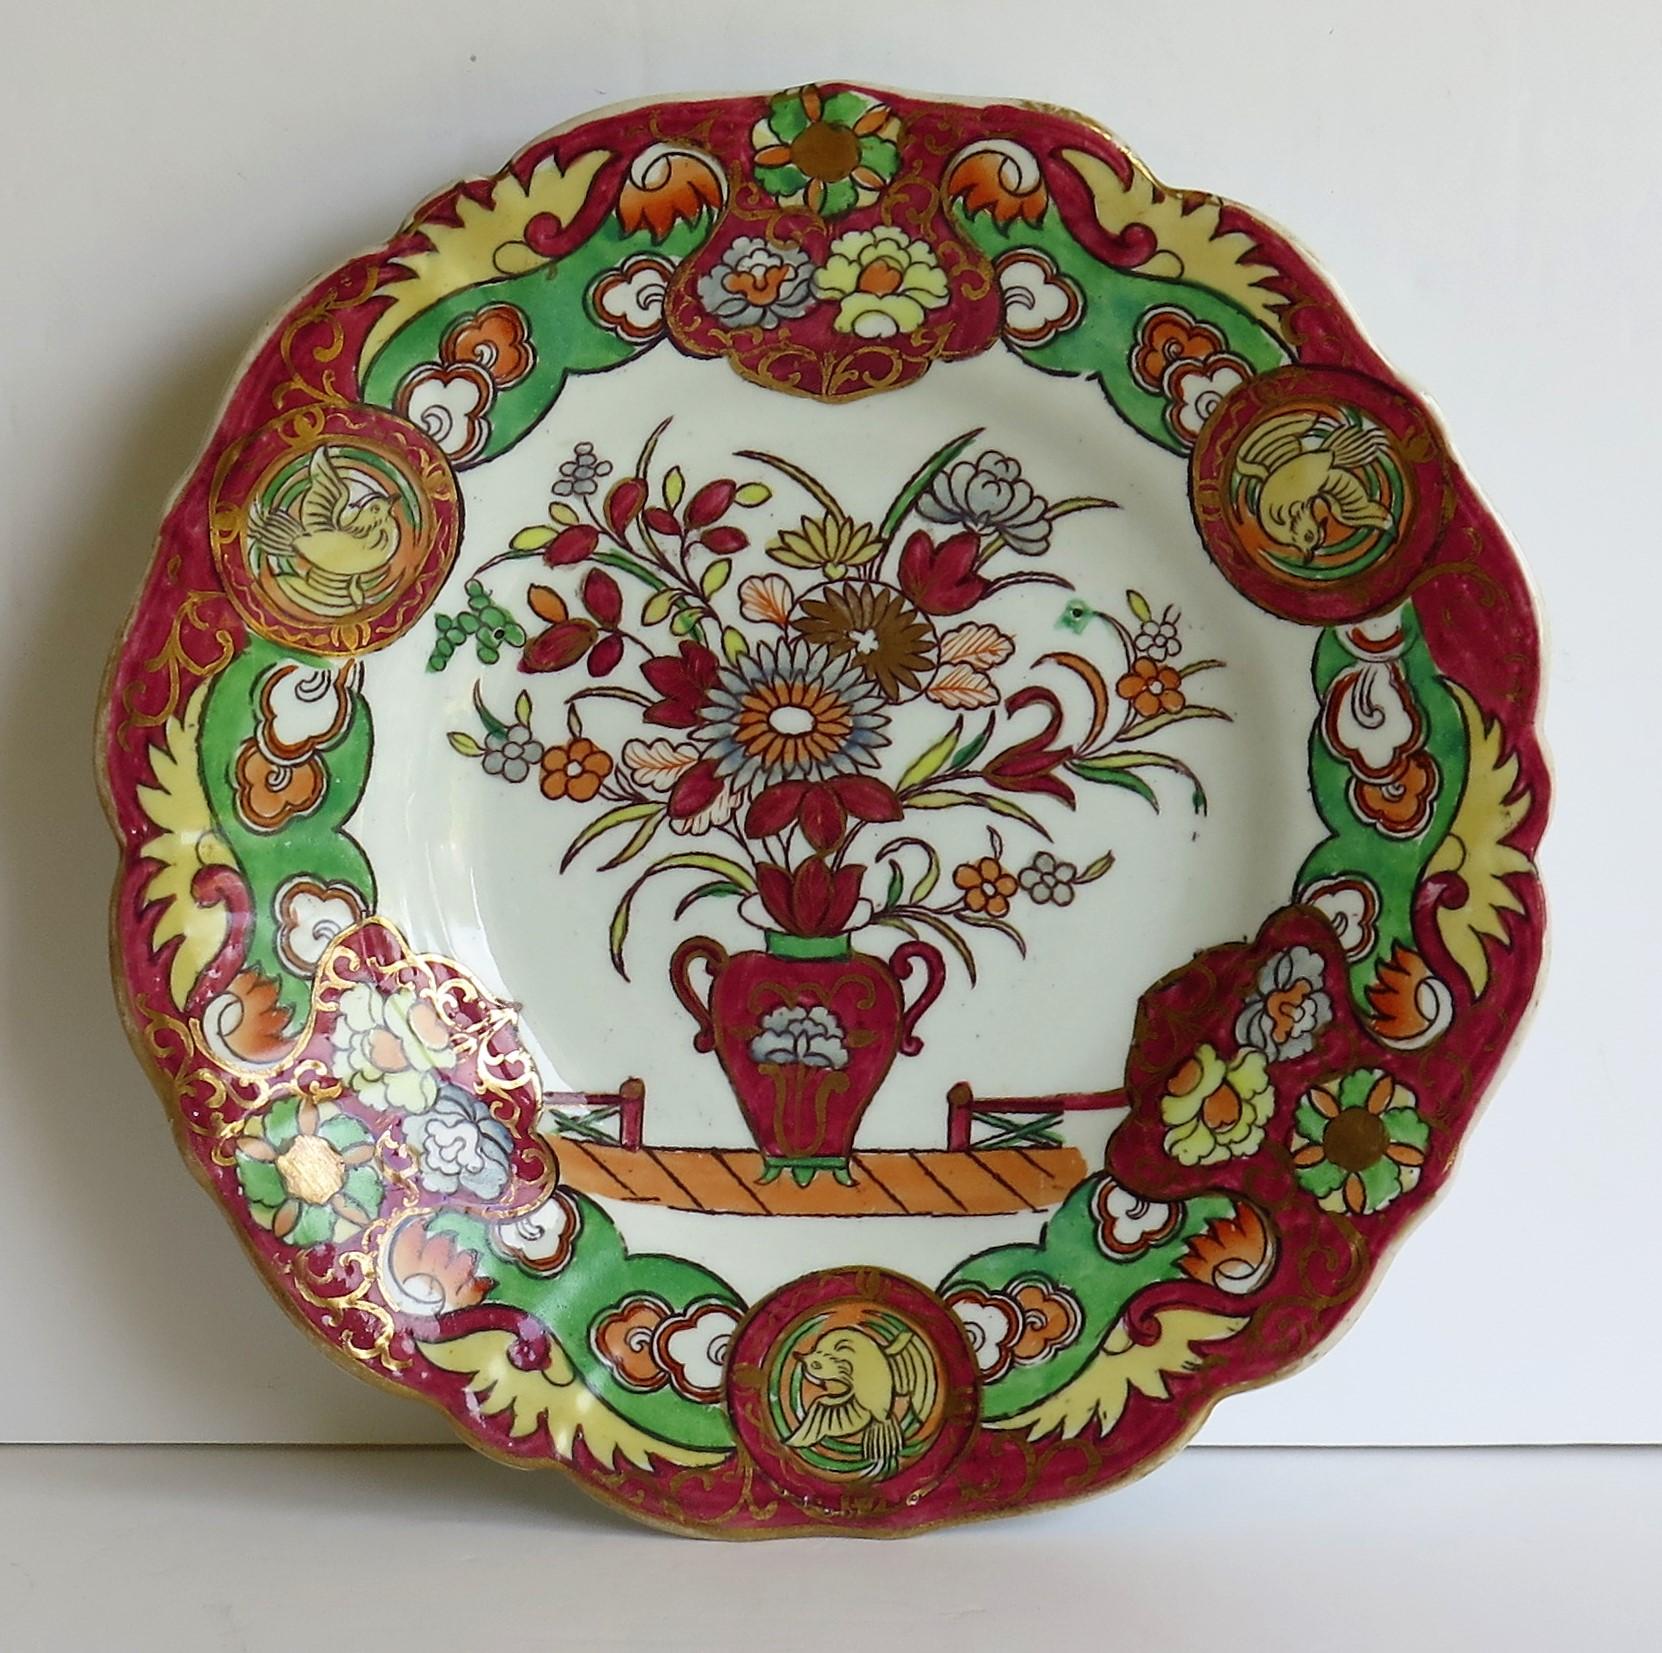 This is a very attractive desert dish or plate. Made by Mason's Ironstone Pottery, in the early 19th century, circa 1830.

The bowl is decorated in the fence, vase and doves chinoiserie influenced pattern, which shows a central flower filled vase,